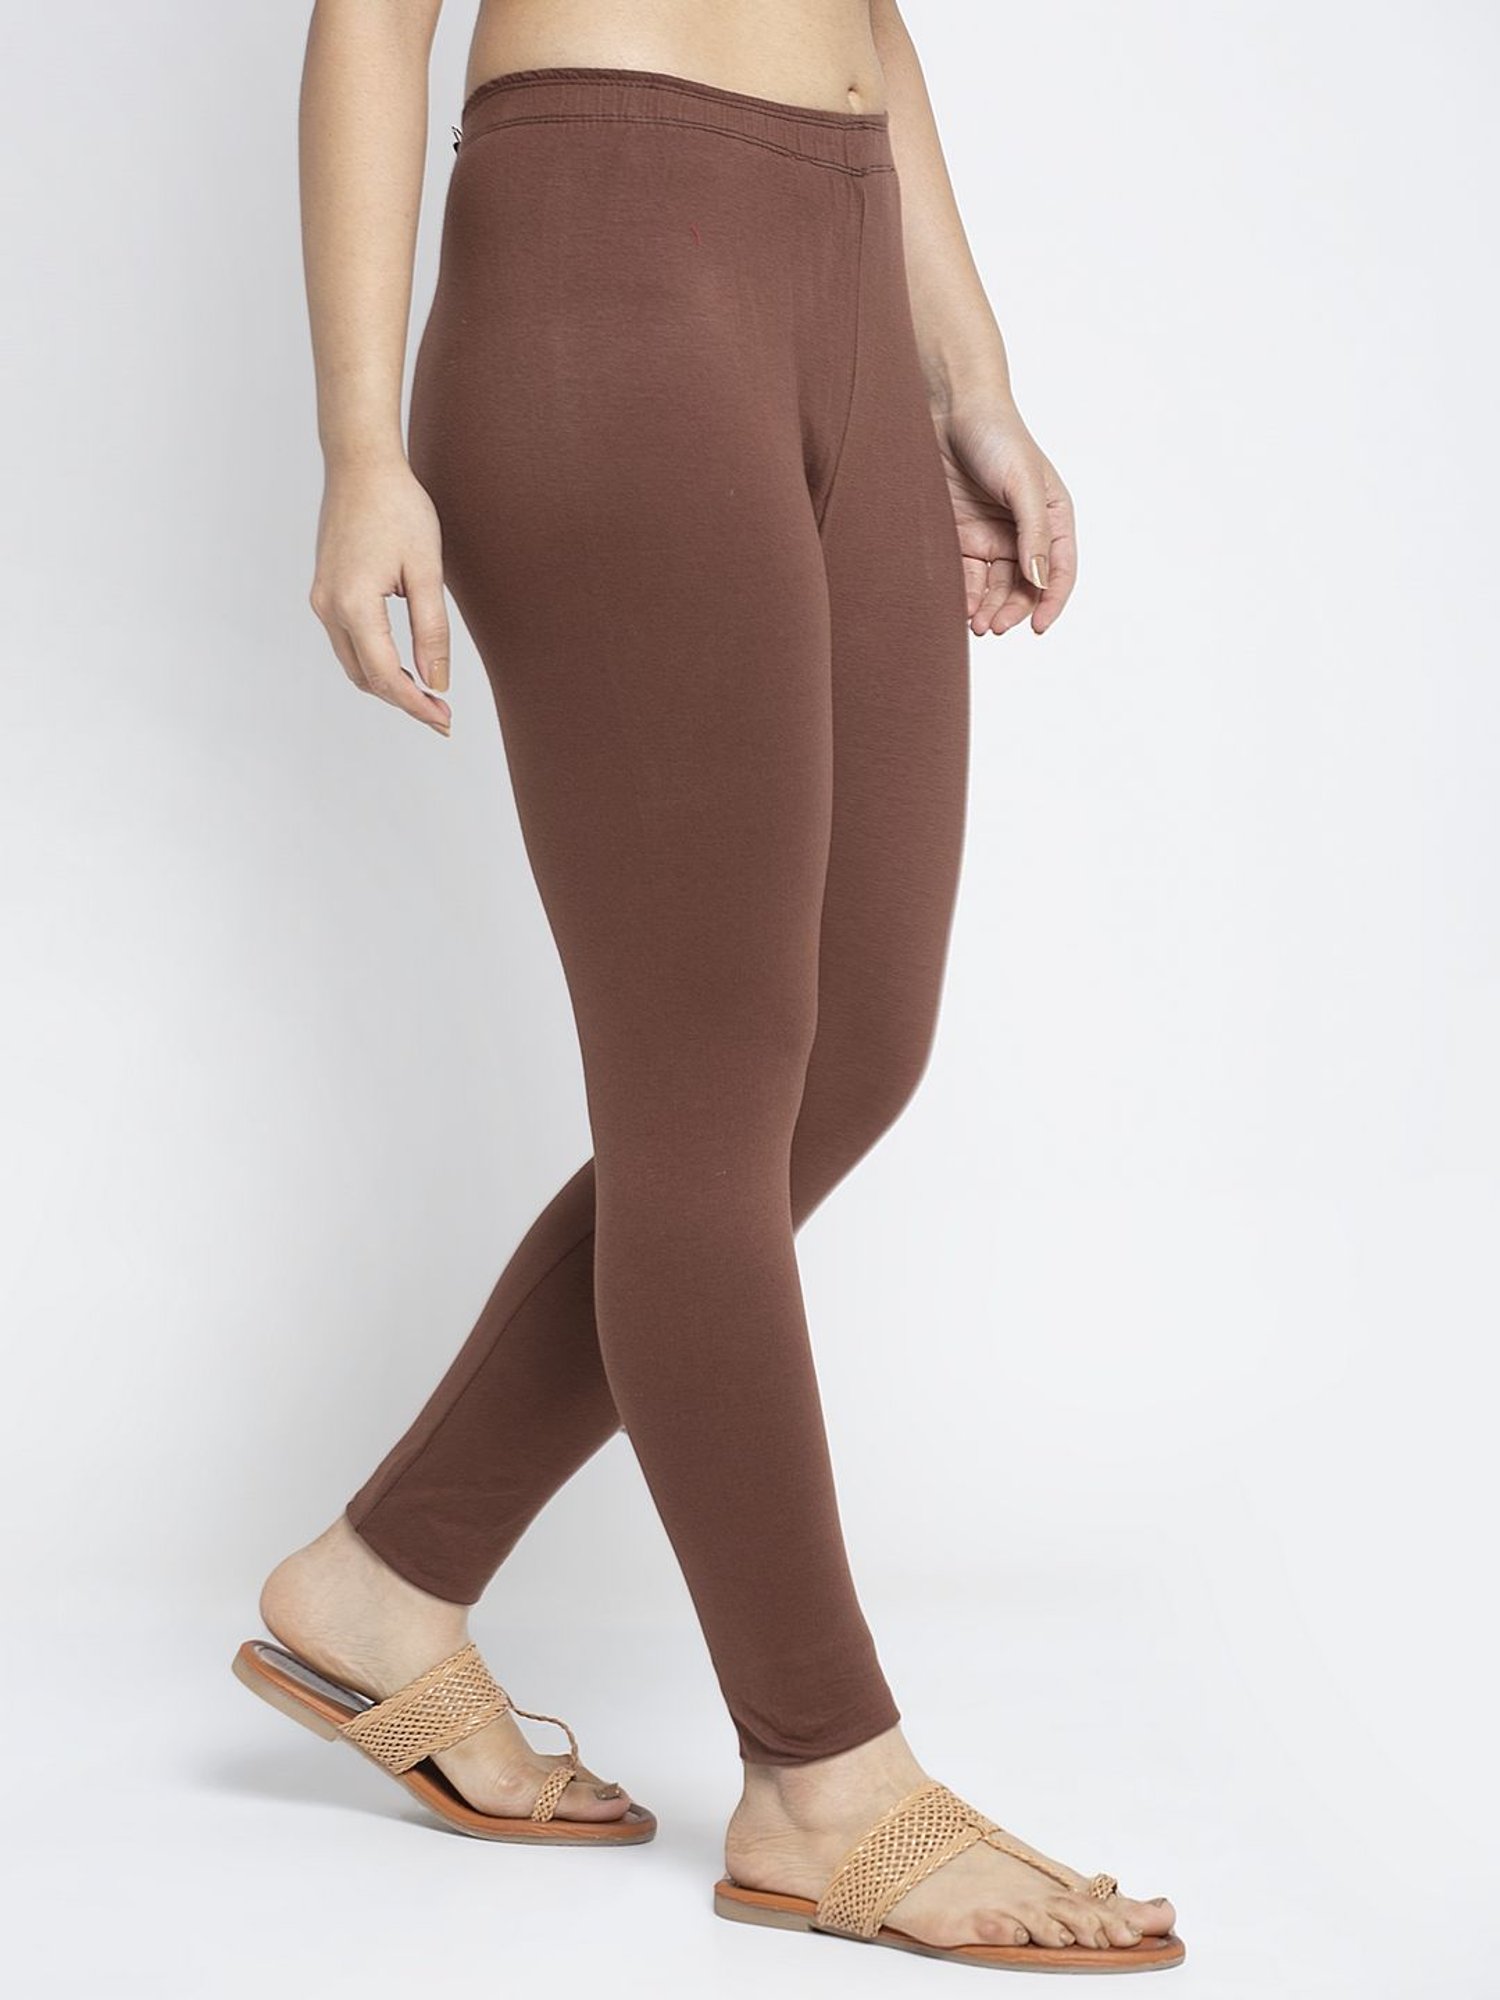 Buy Nymph Leggings Chocolate Brown, Women Yoga Pants, Leggings, Capris  Style, 3/4lenght, Criss-cross Lace Up, Ecoluxe Online in India 